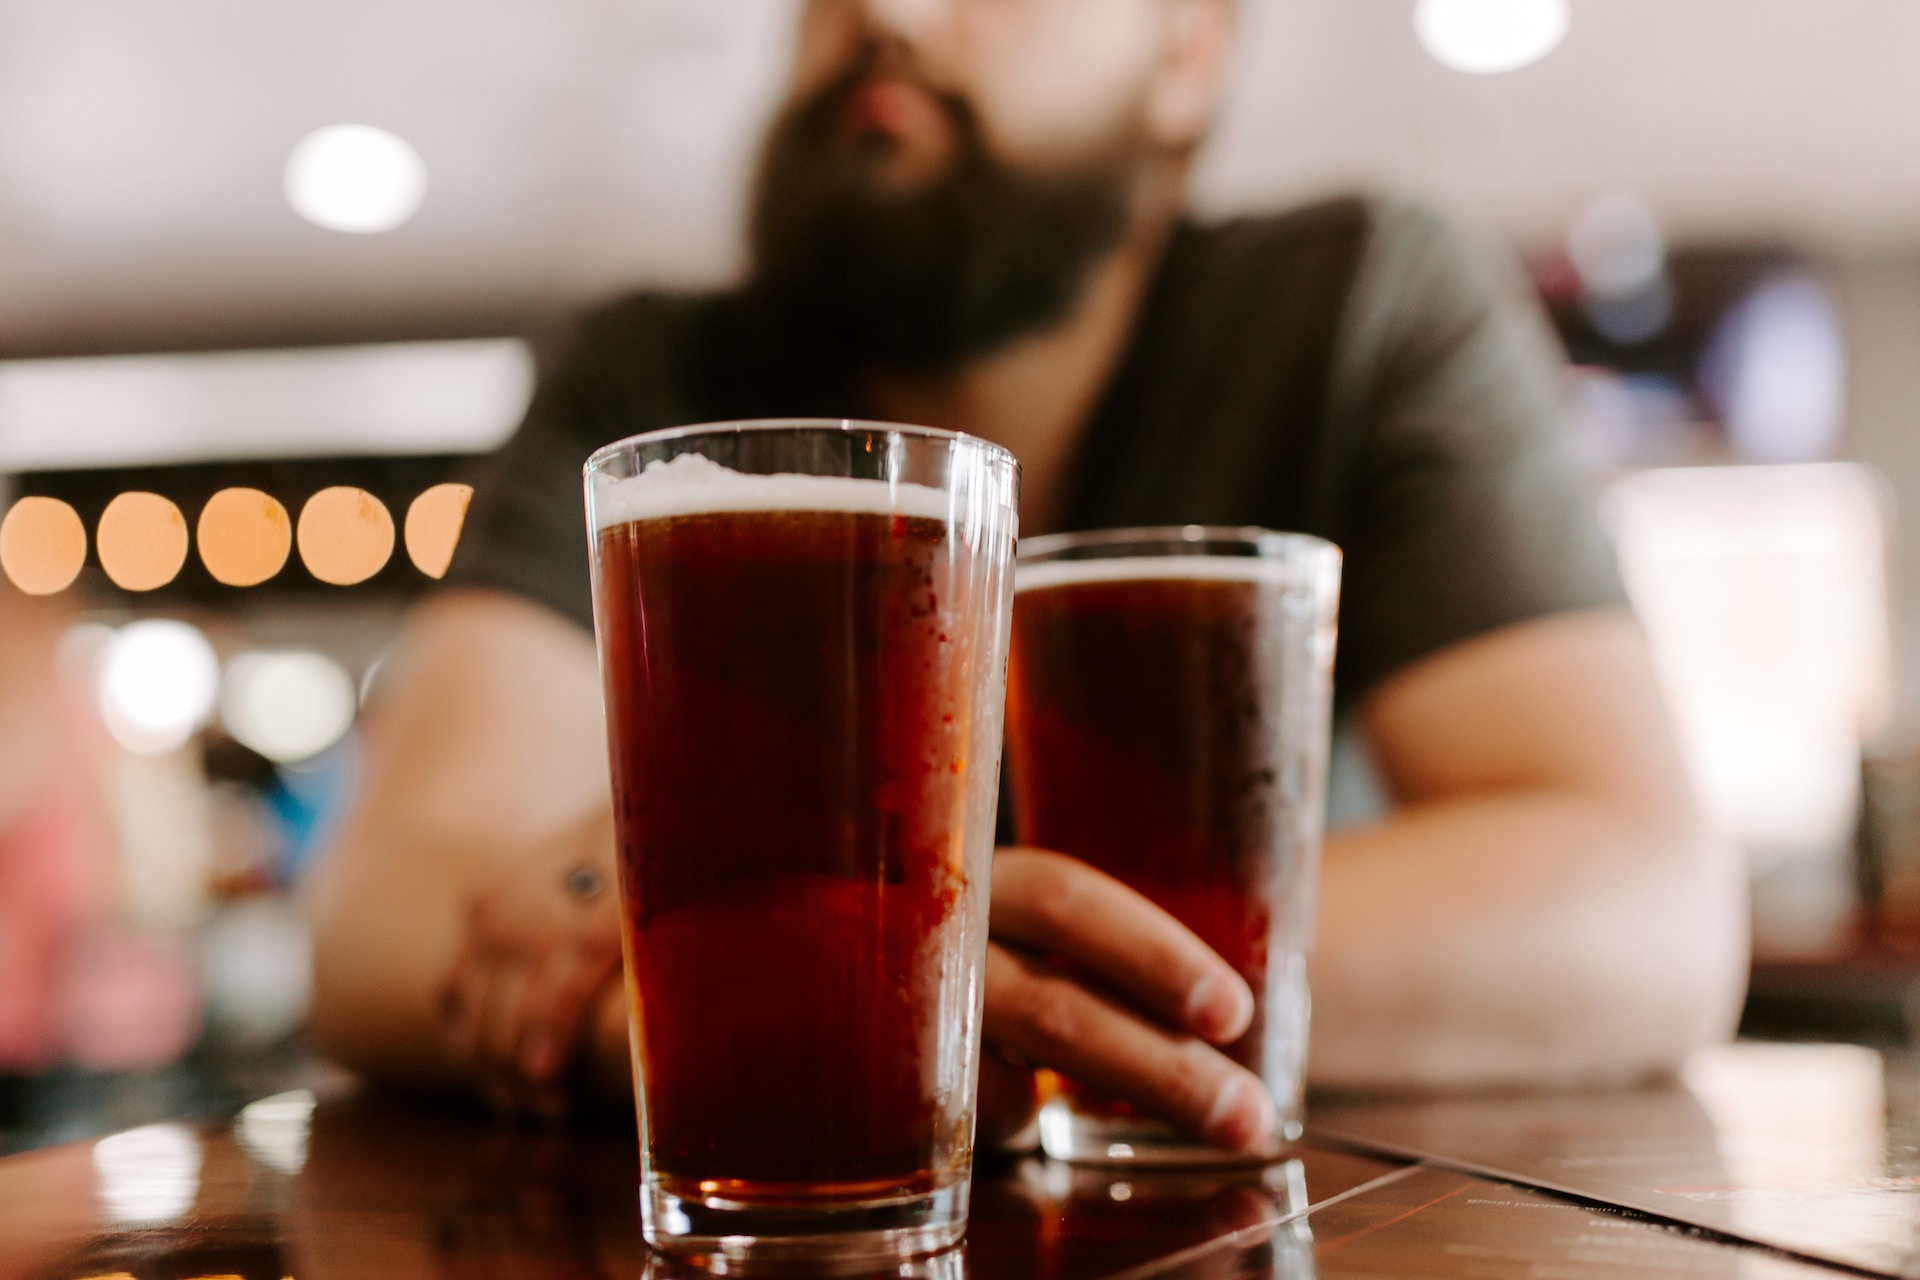 Two glasses of dealcoholized beer on a table, with a blurred bearded guy holding one of them